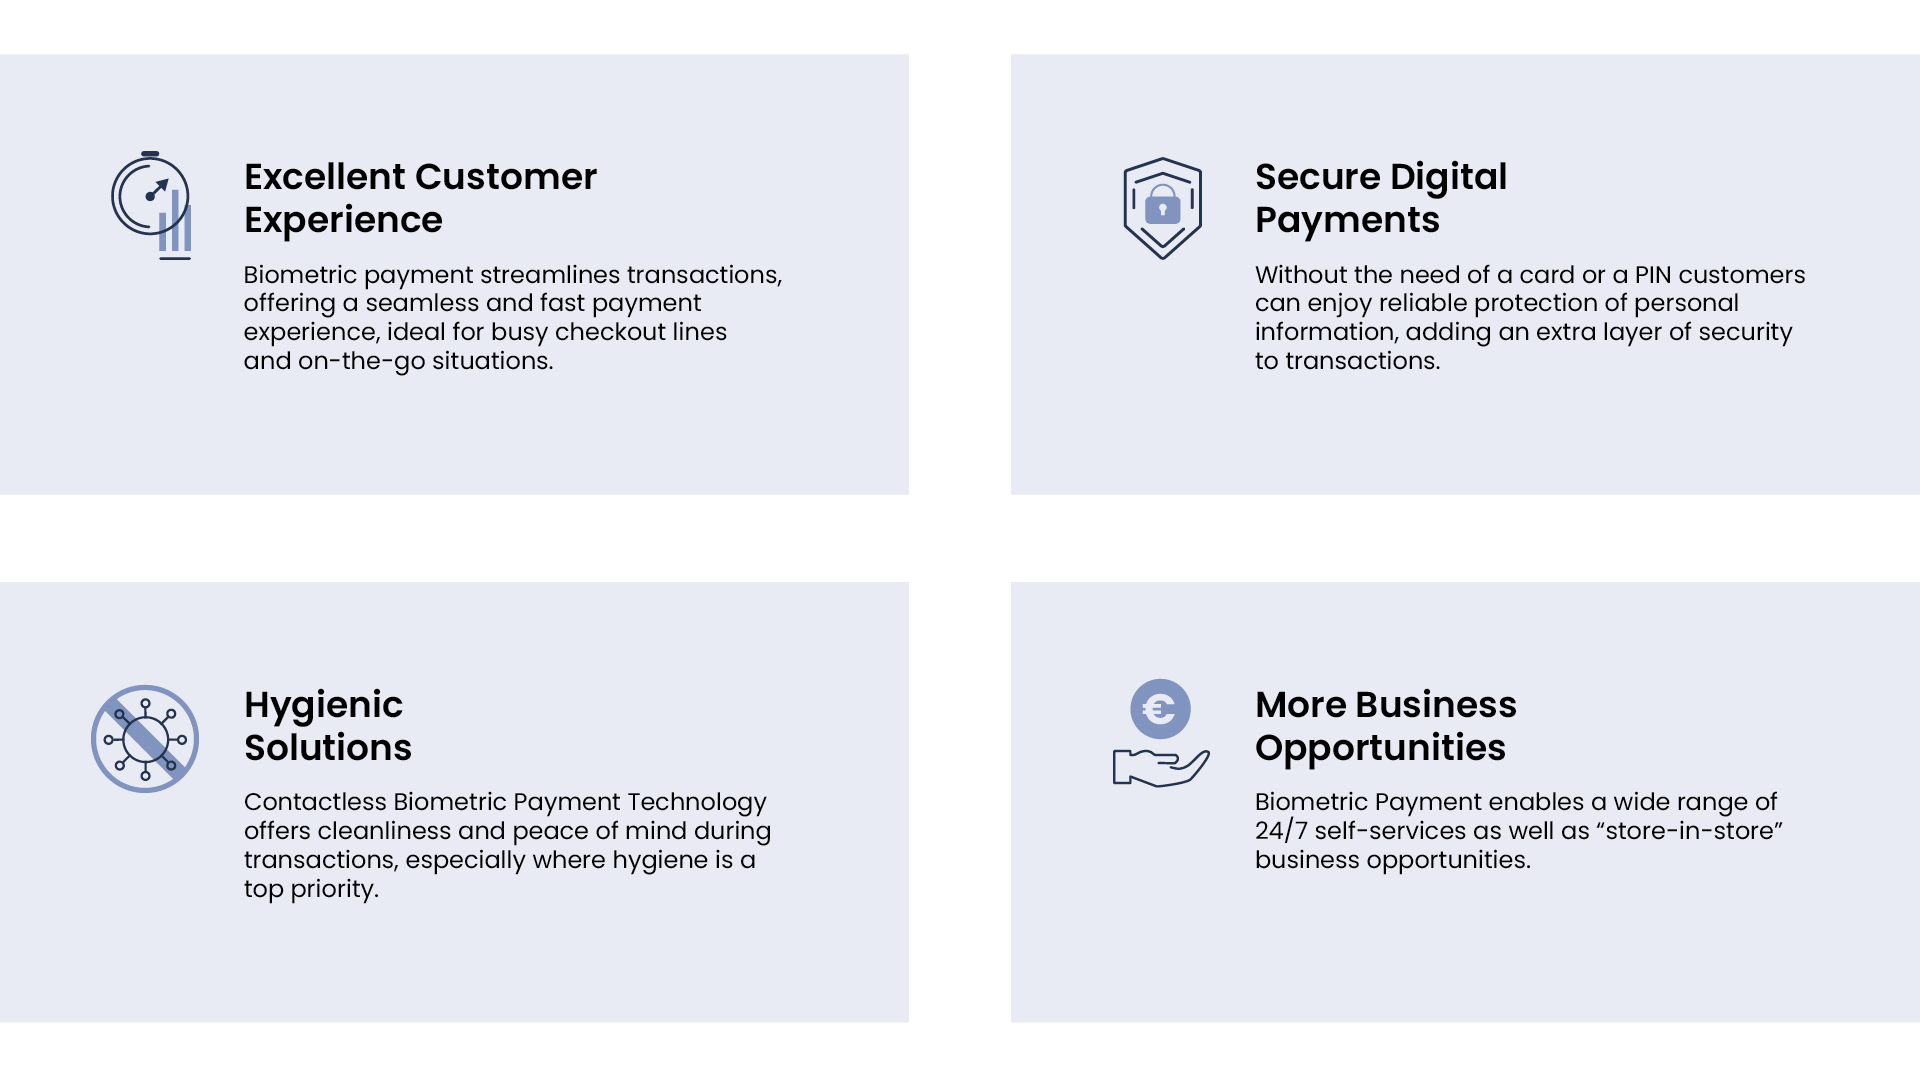 Benefits of Biometric payments include Excellent Customer Experience, Secure Digital Payments, Hygienic Solutions, and more business opportunities